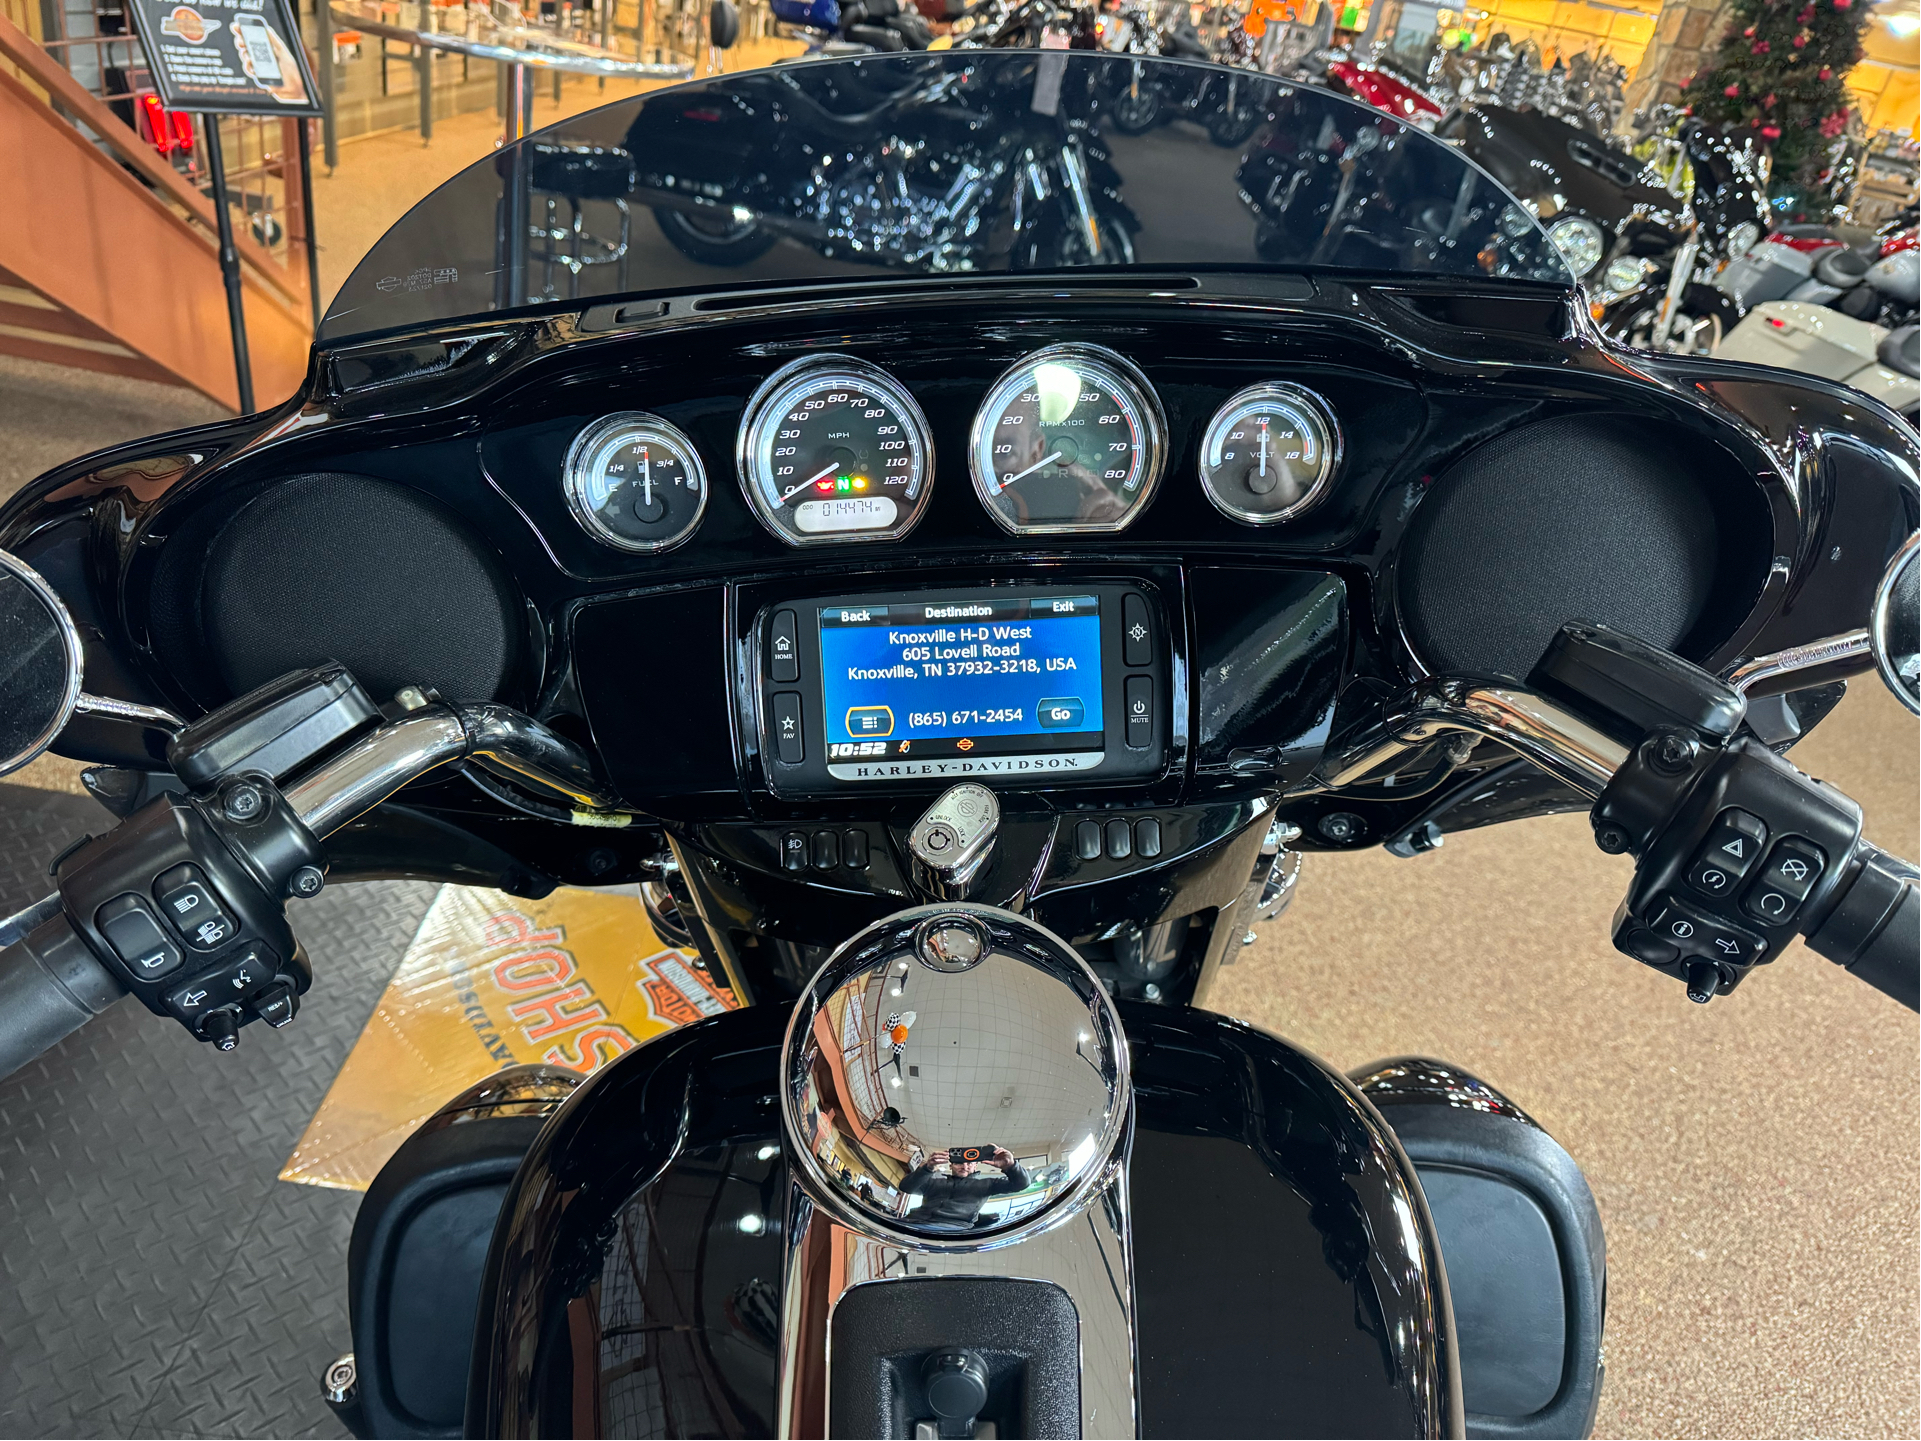 2018 Harley-Davidson Ultra Limited in Knoxville, Tennessee - Photo 13